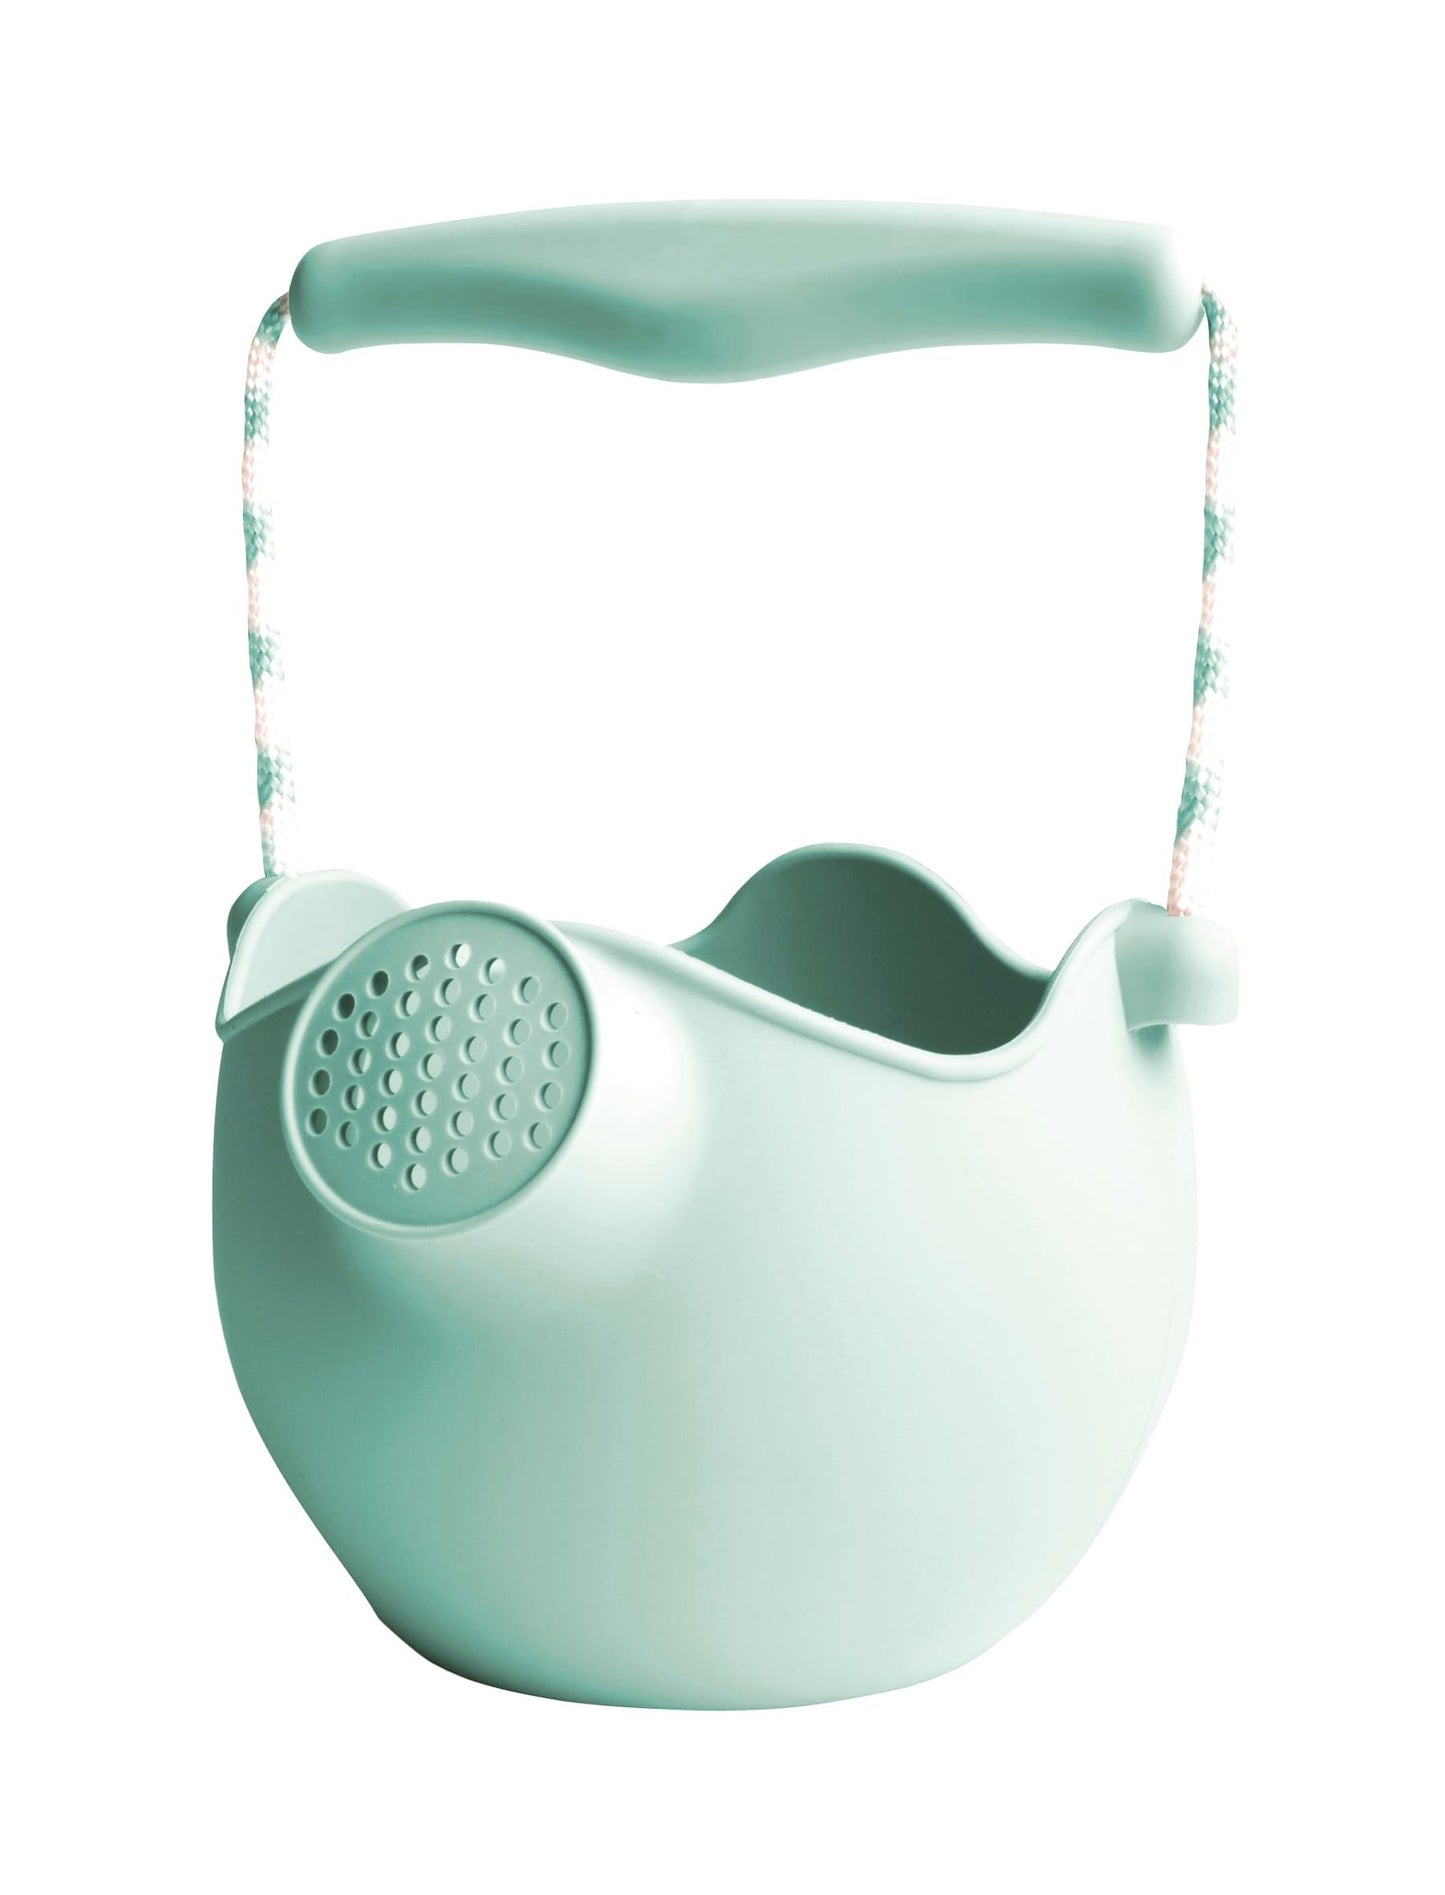 Scrunch Watering Cans